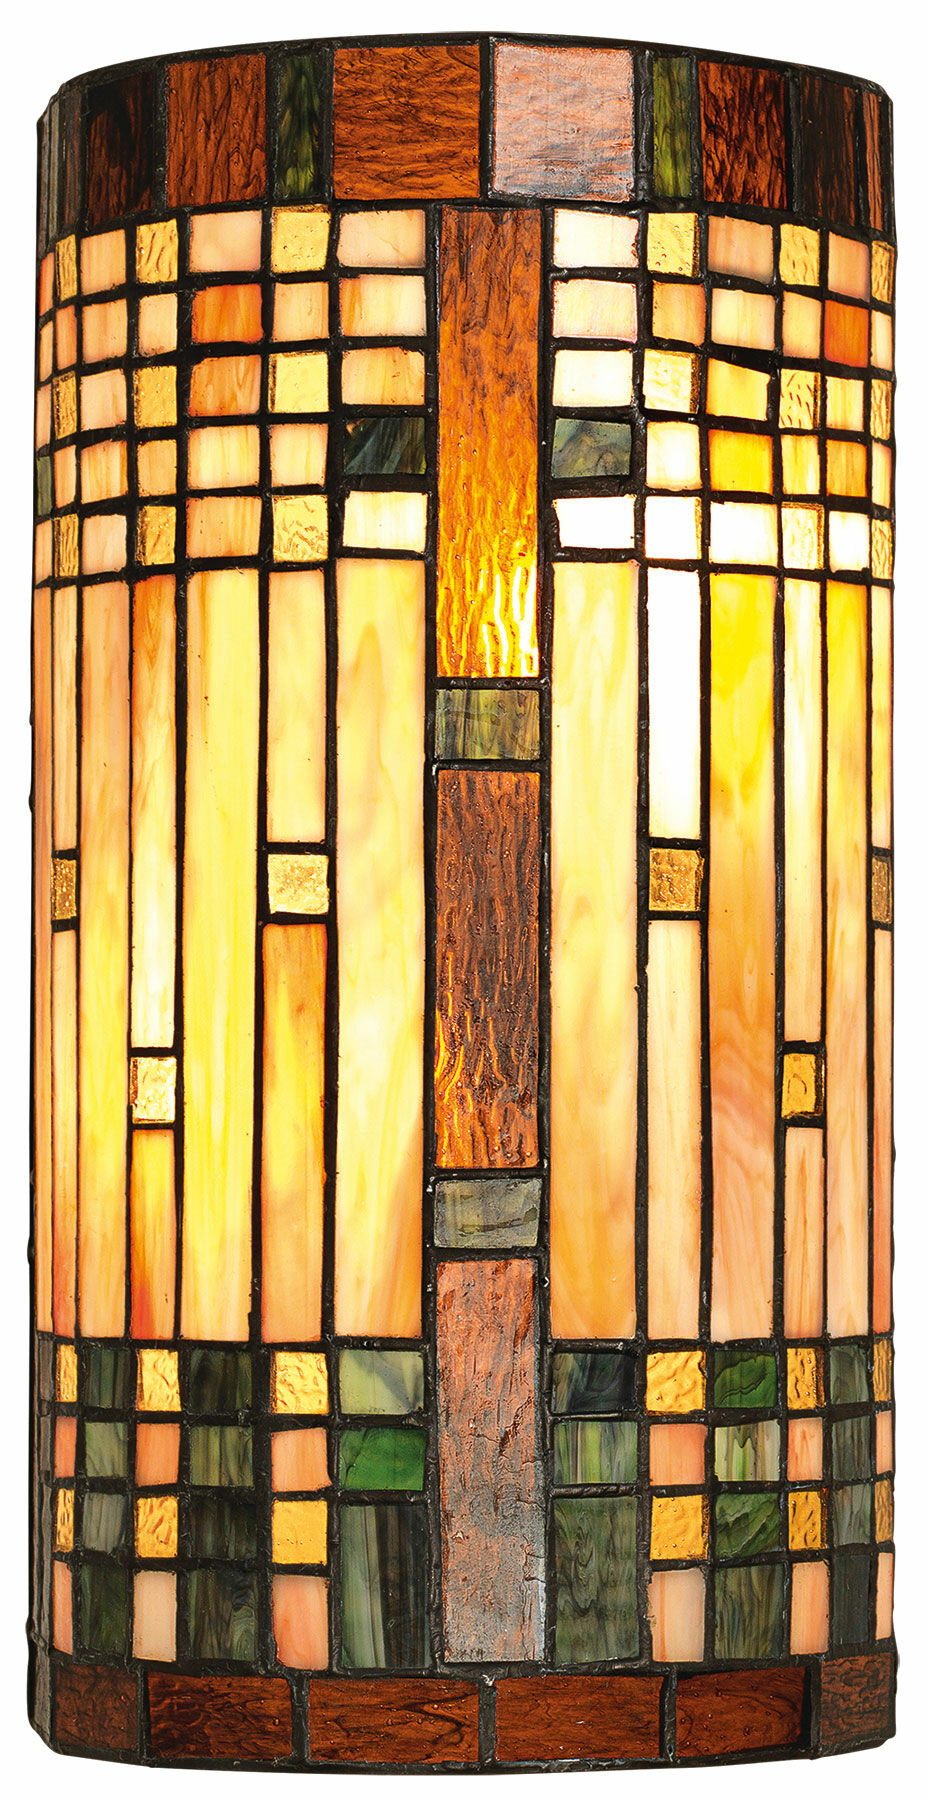 Wall lamp "Piazza" - after Louis C. Tiffany